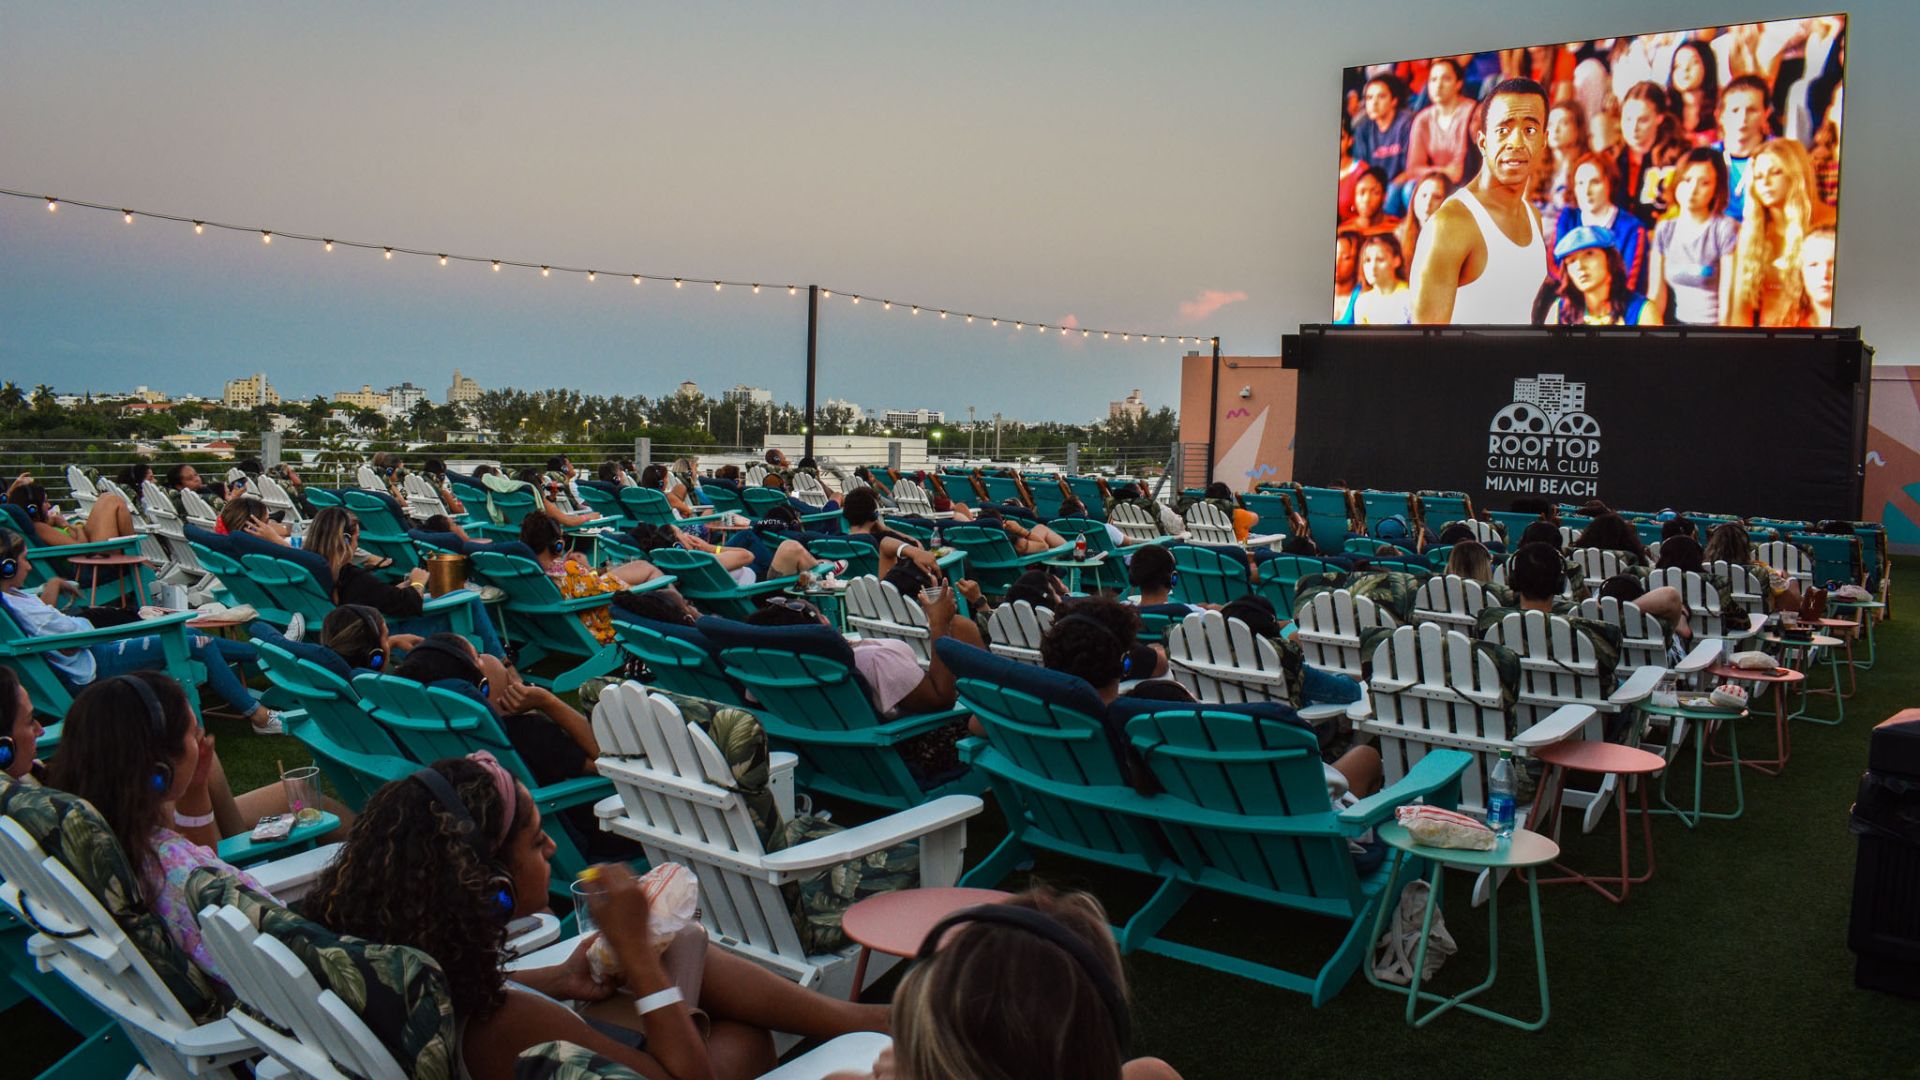 Enjoy These Movies This Summer At The Rooftop Cinema Club